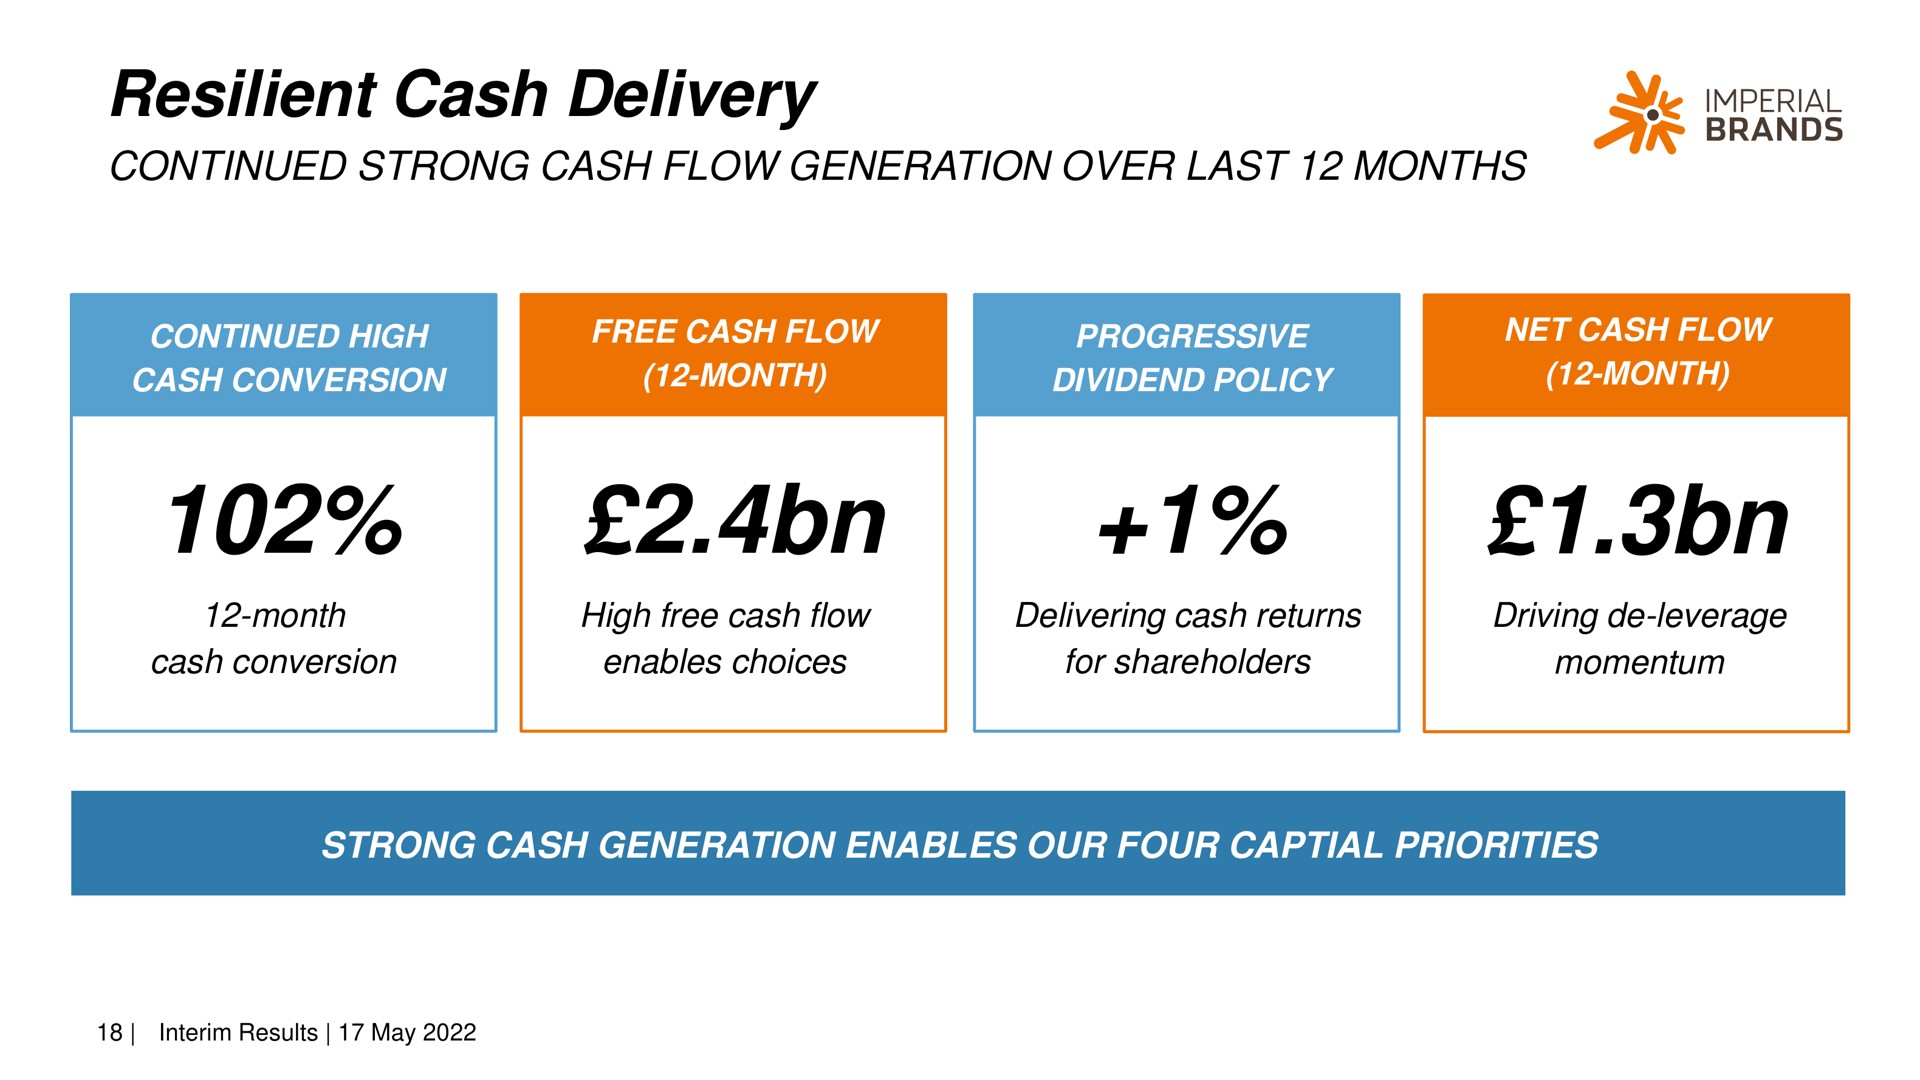 resilient cash delivery | Imperial Brands